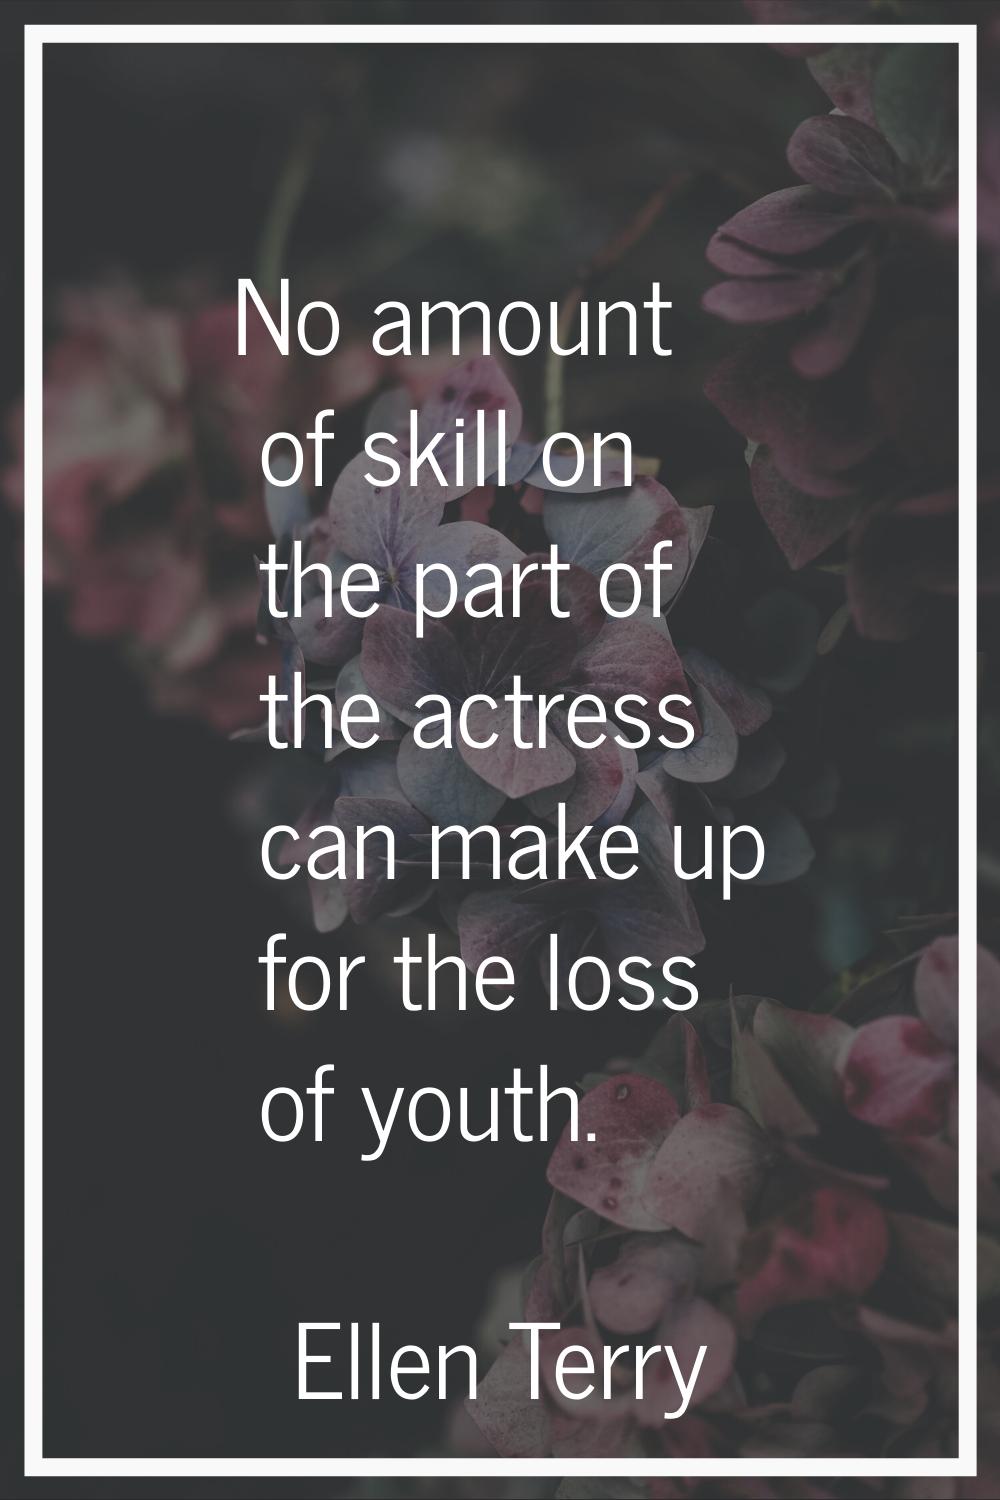 No amount of skill on the part of the actress can make up for the loss of youth.